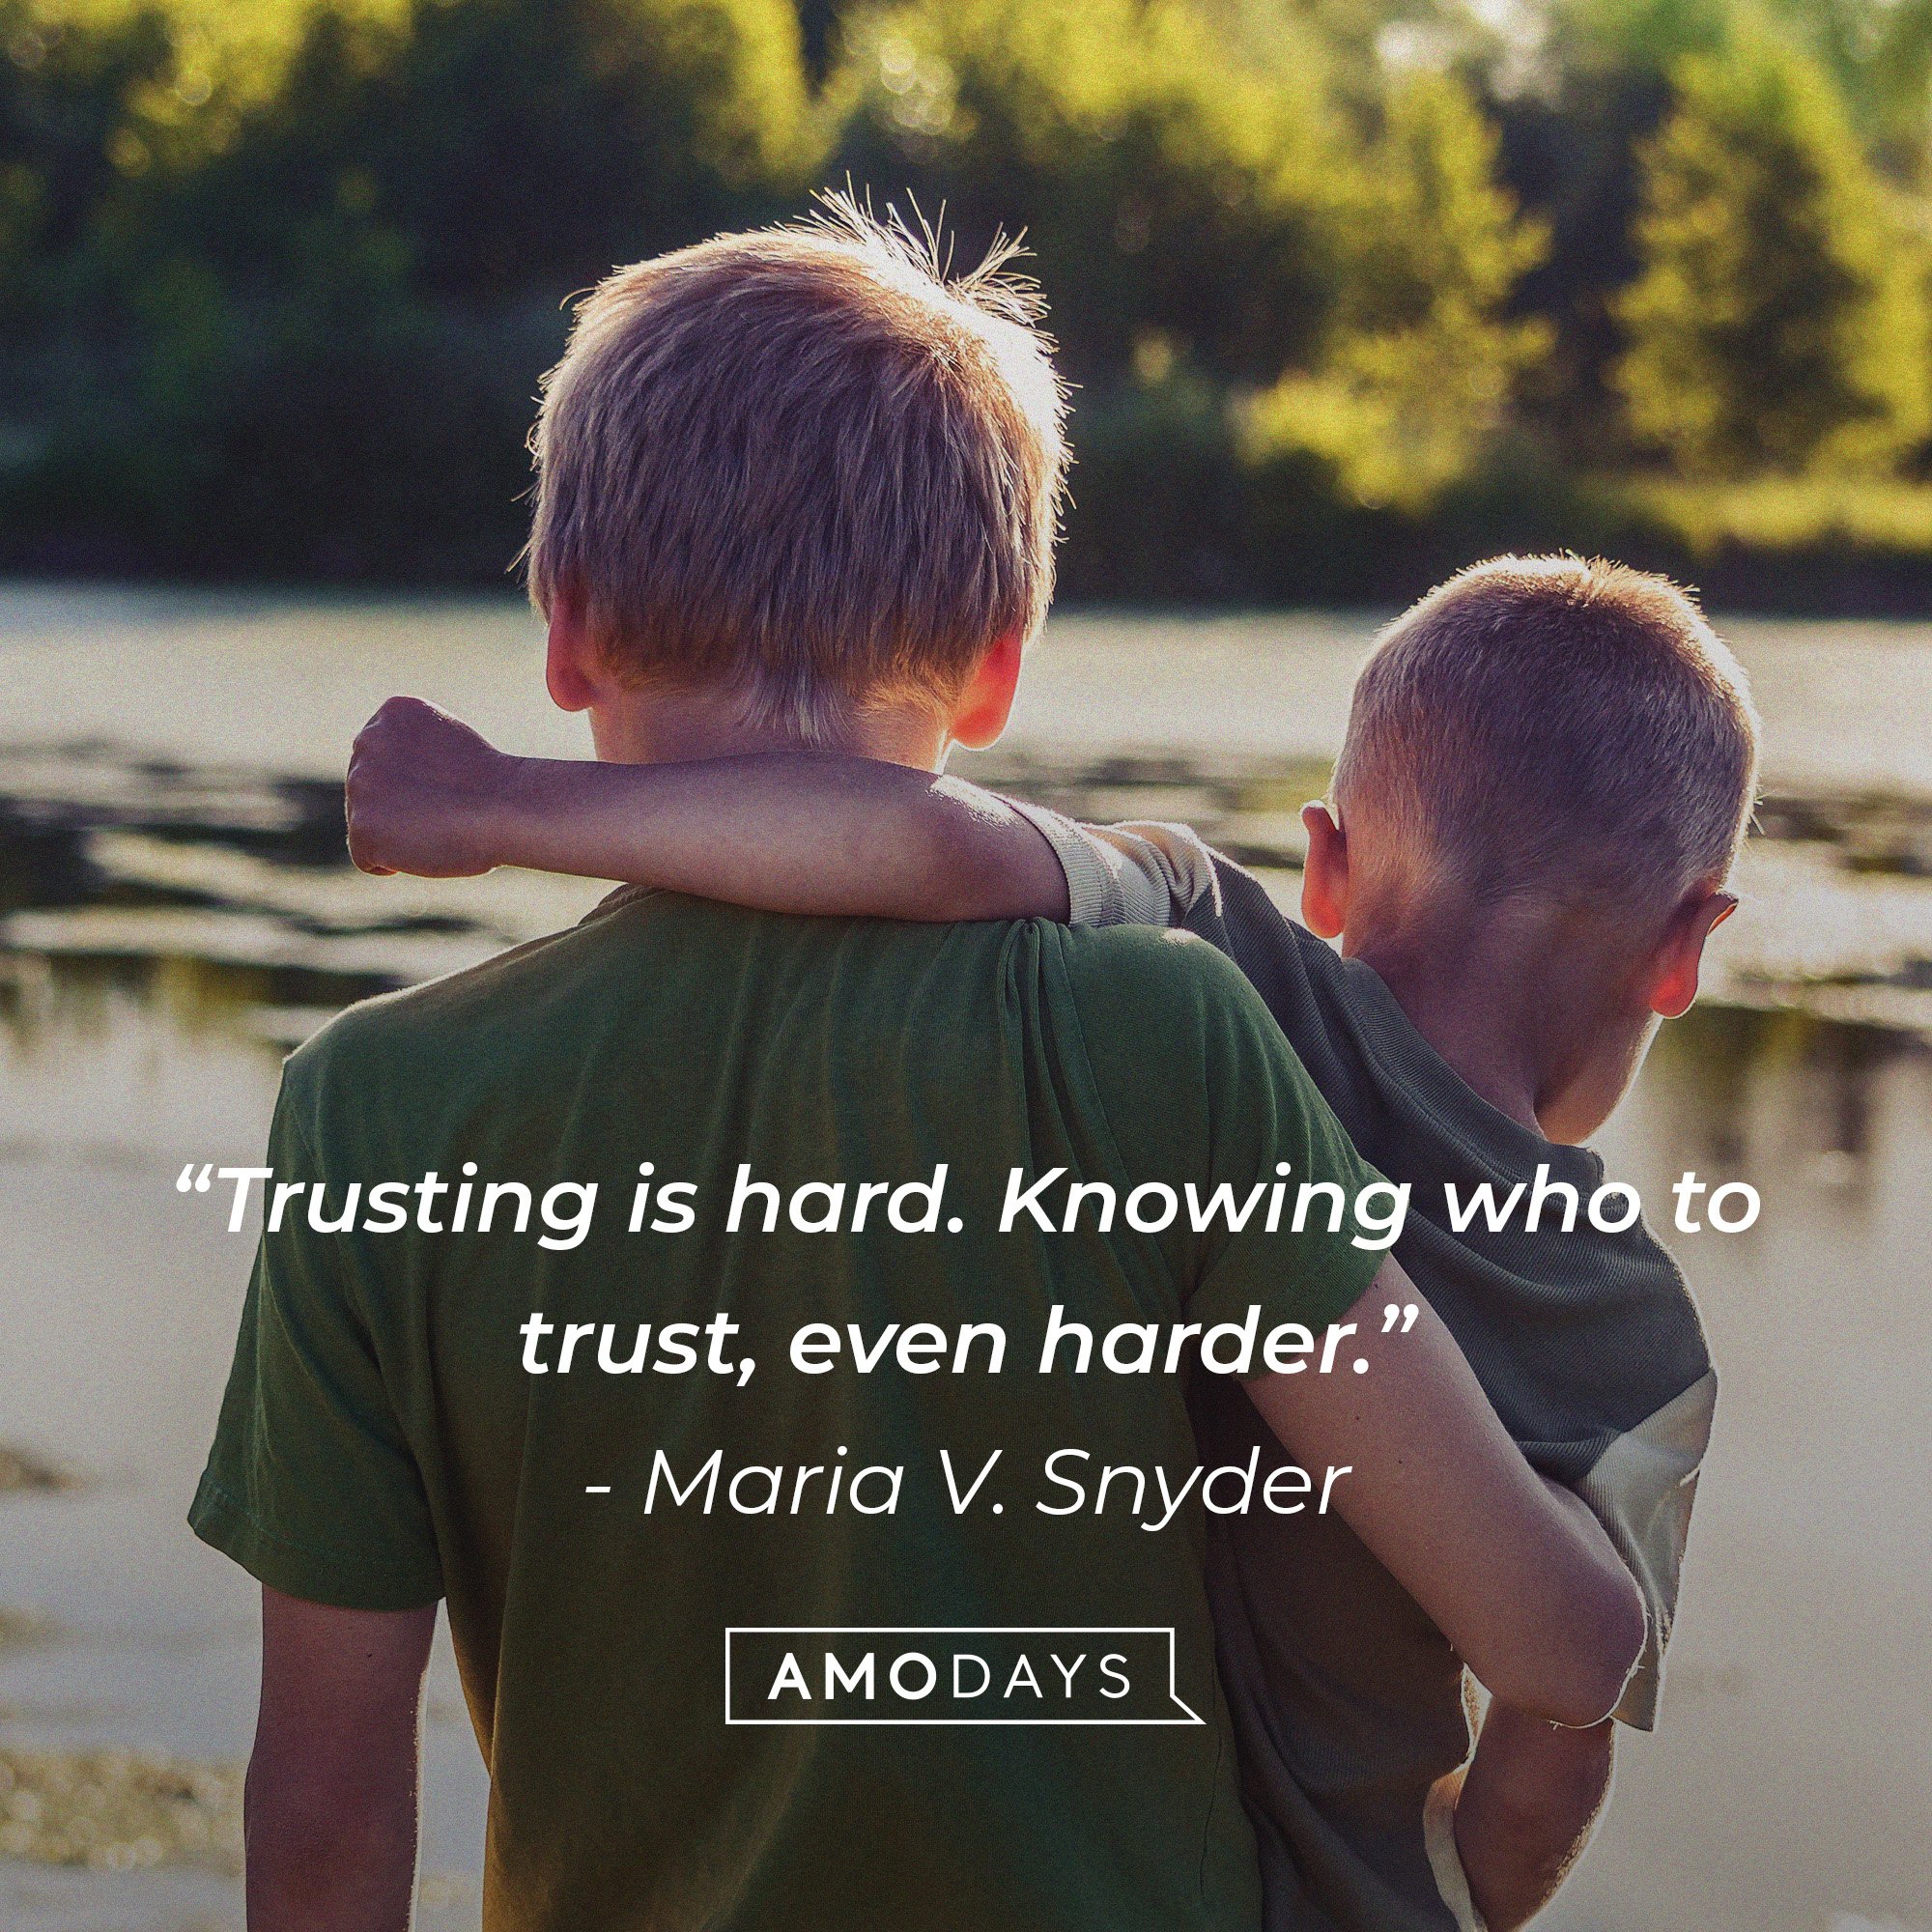 Maria V. Snyder’s quote: “Trusting is hard. Knowing who to trust, even harder.” | Image: AmoDays